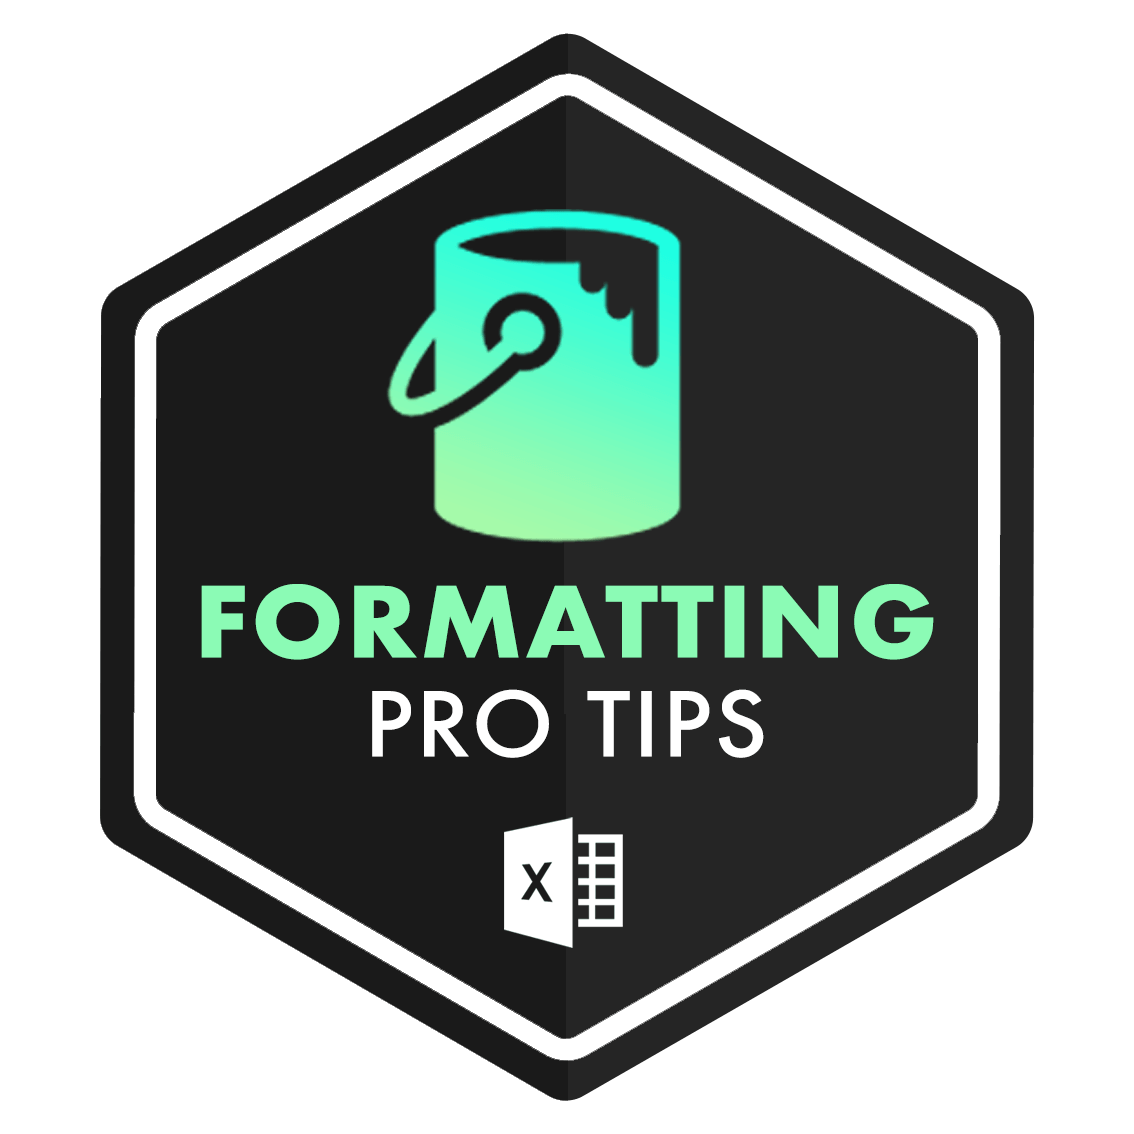 Pro_Tips_Formatting.png